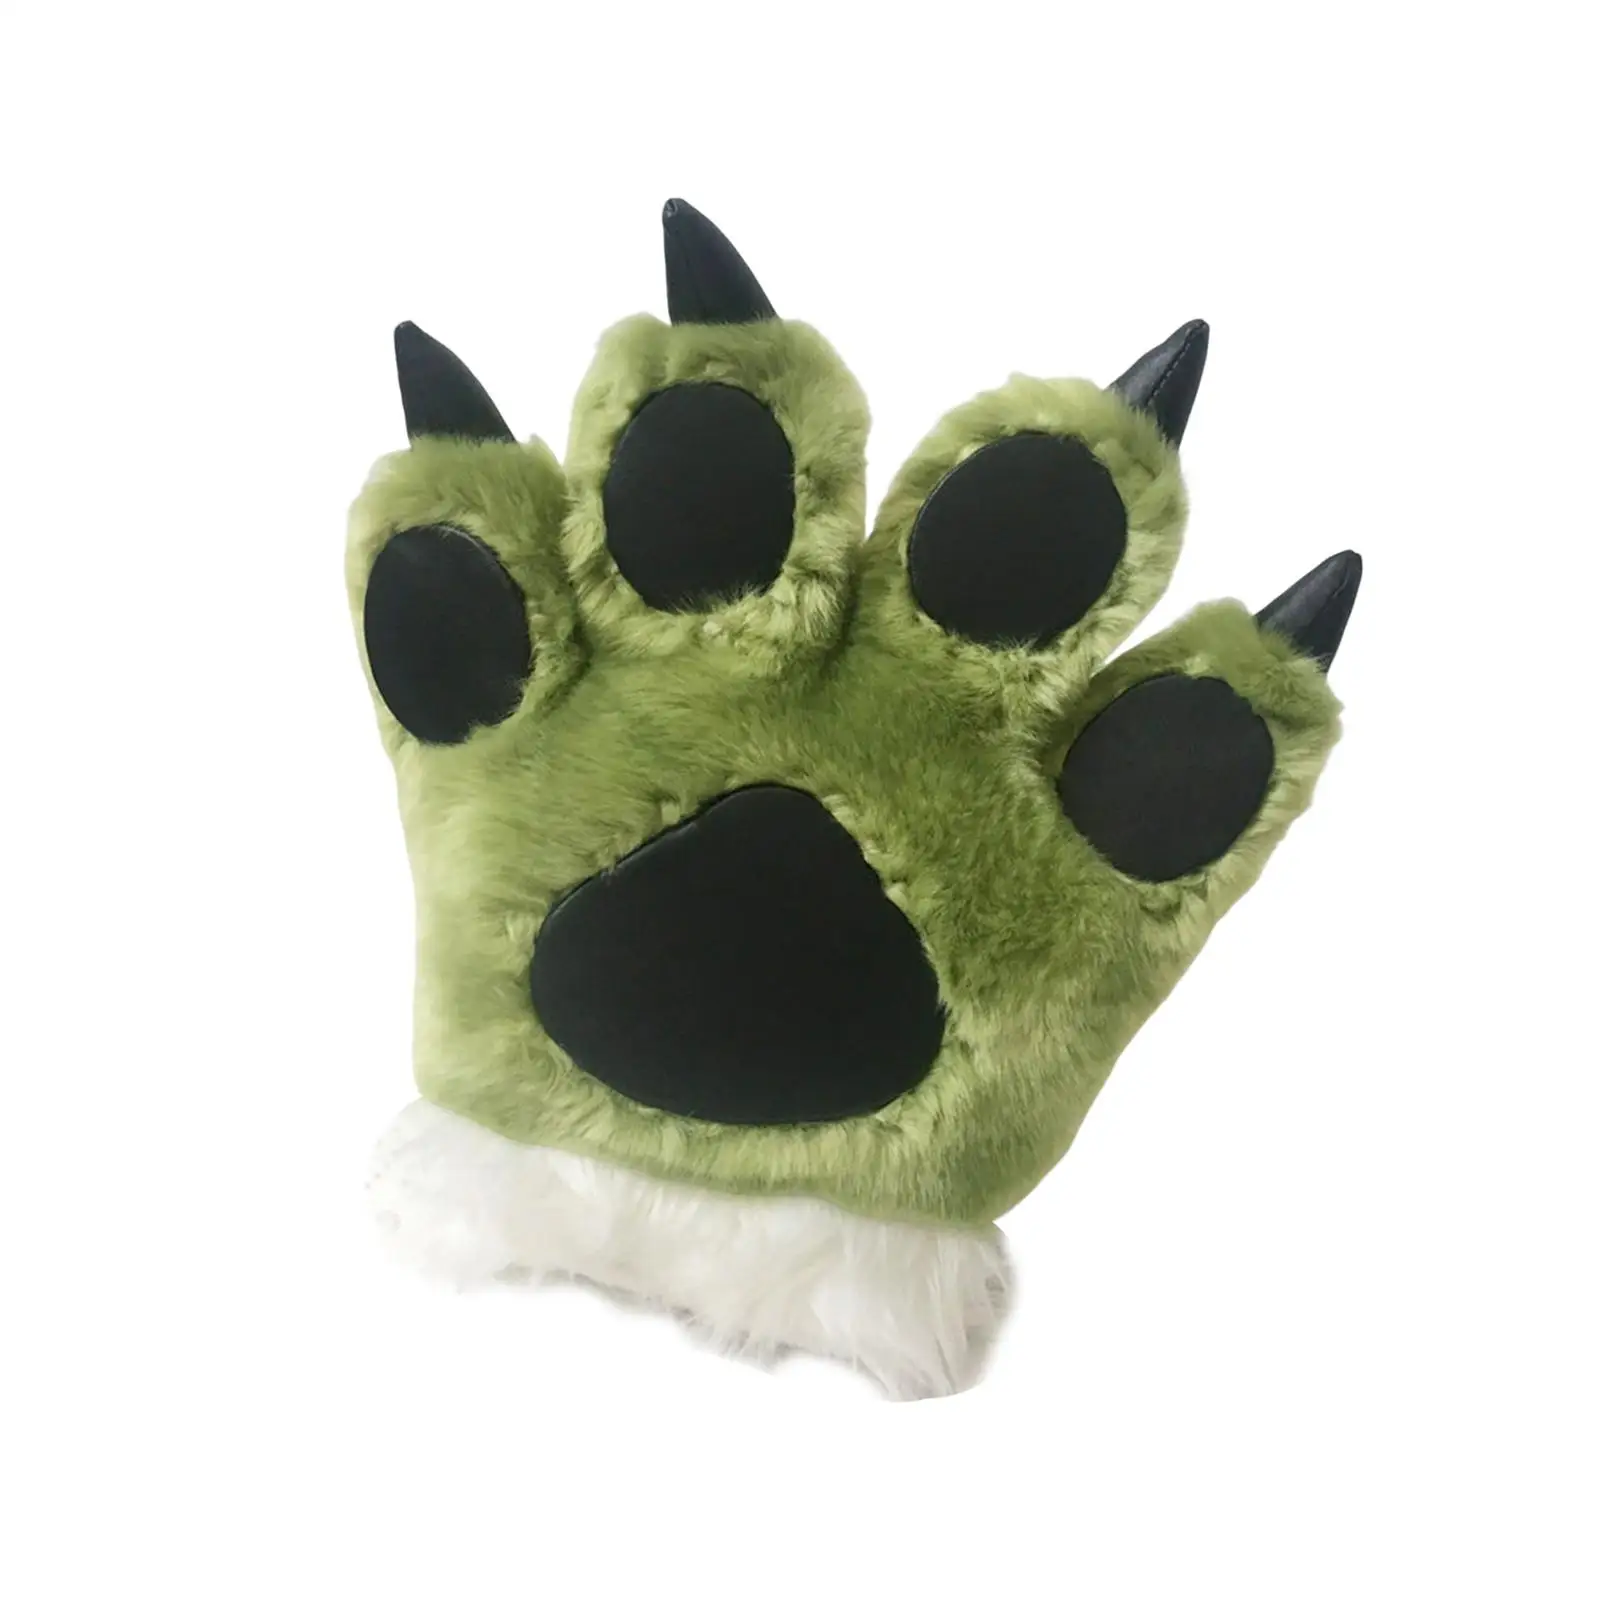 Cute Simulation Animal Palm Paw Glove Plush Toy Soft Game Prop Educational Toys Clawen